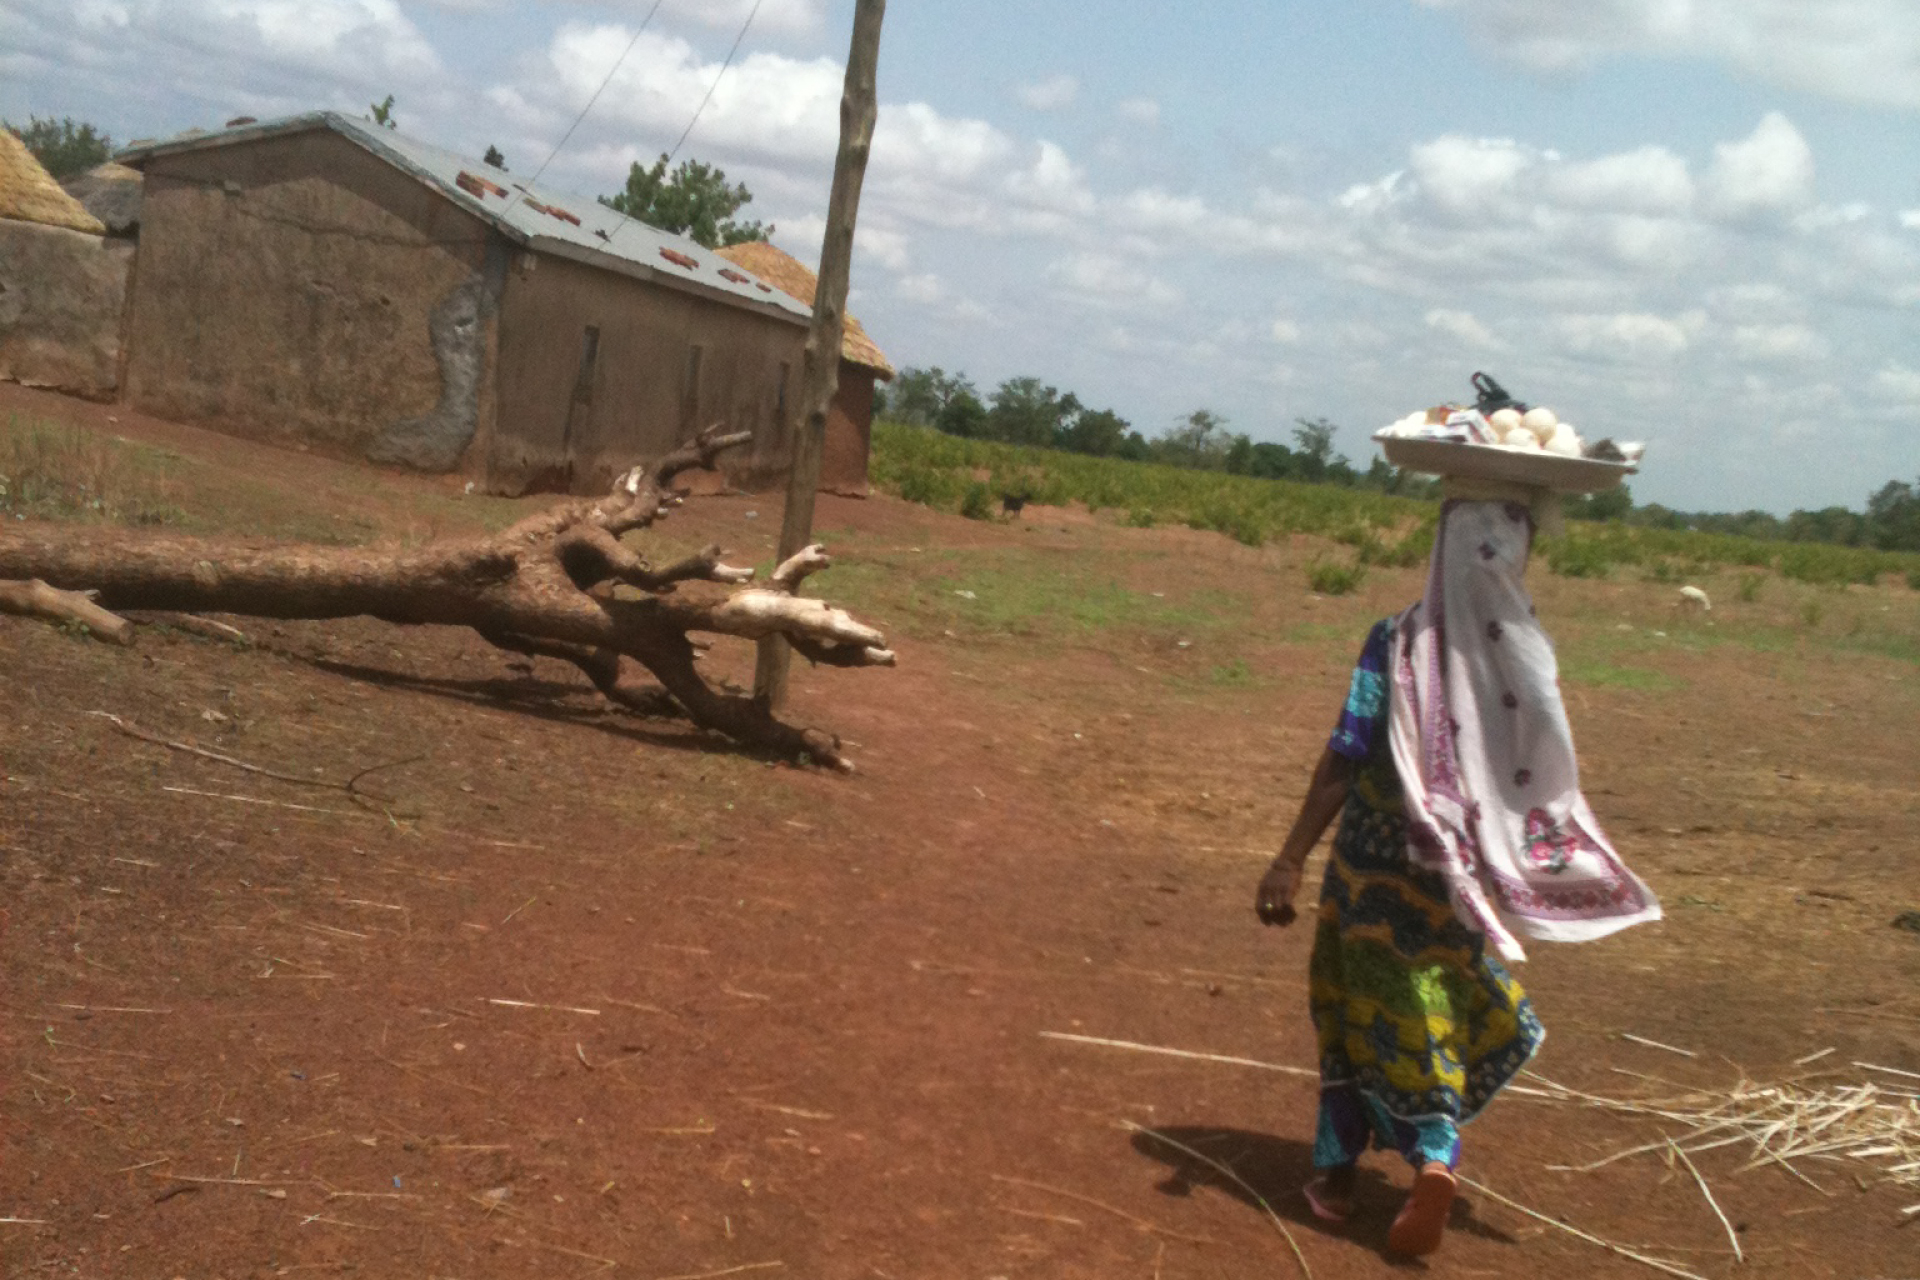 A woman carries a large tray on her head towards a dwelling.